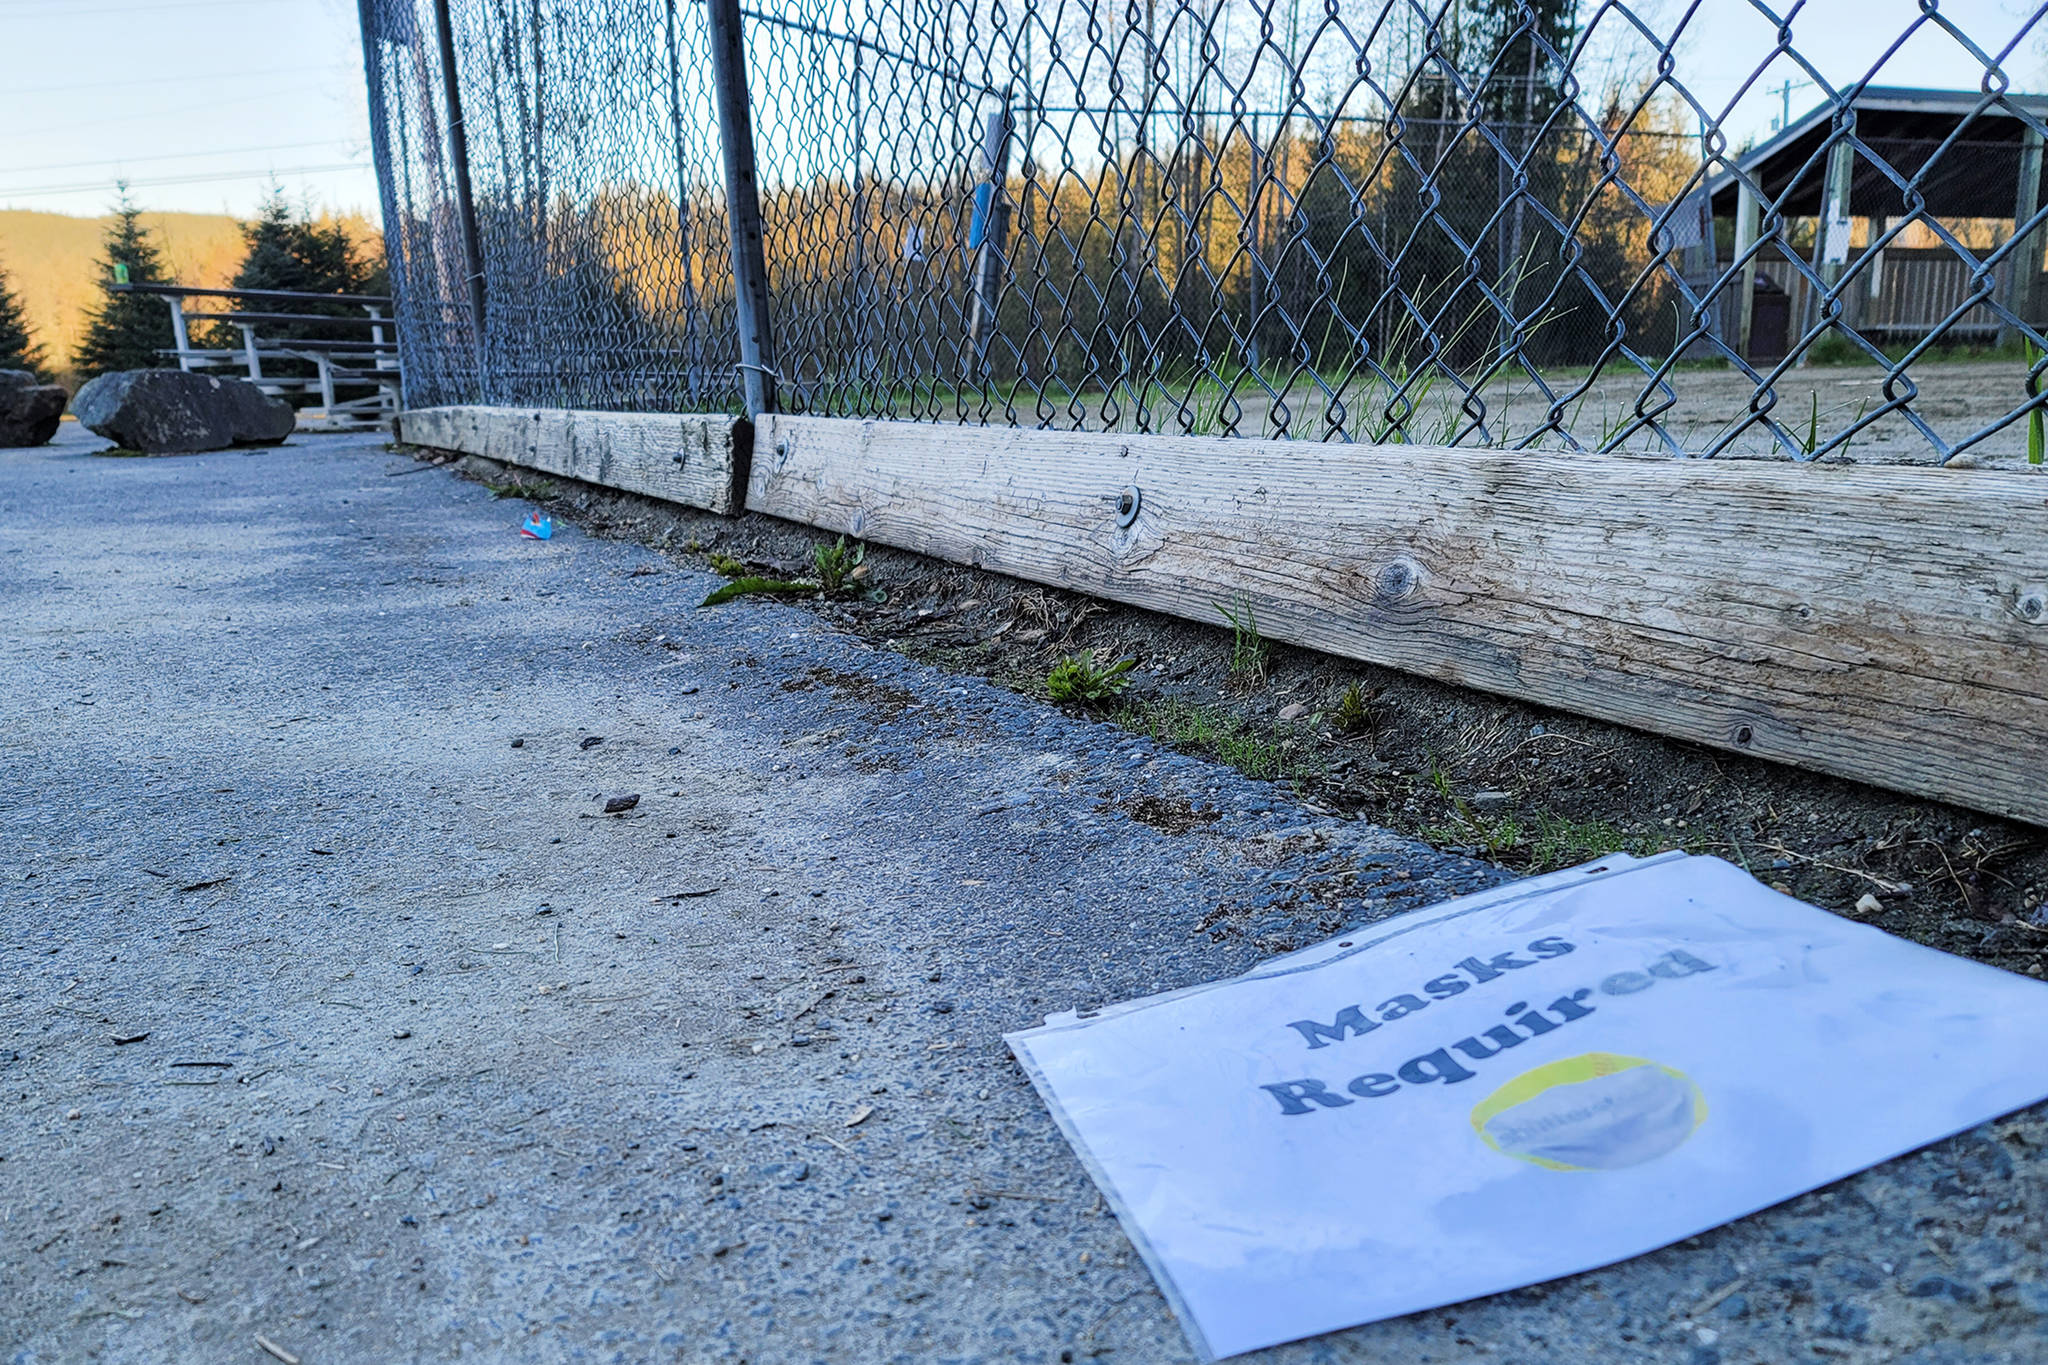 A sign reading "Masks Required" lies on the ground near a softball field at Melvin Park on Tuesday morning. In a community briefing, city officials clarified why the mask mandate changed last week and what to expect going forward. (Ben Hohenstatt / Juneau Empire)